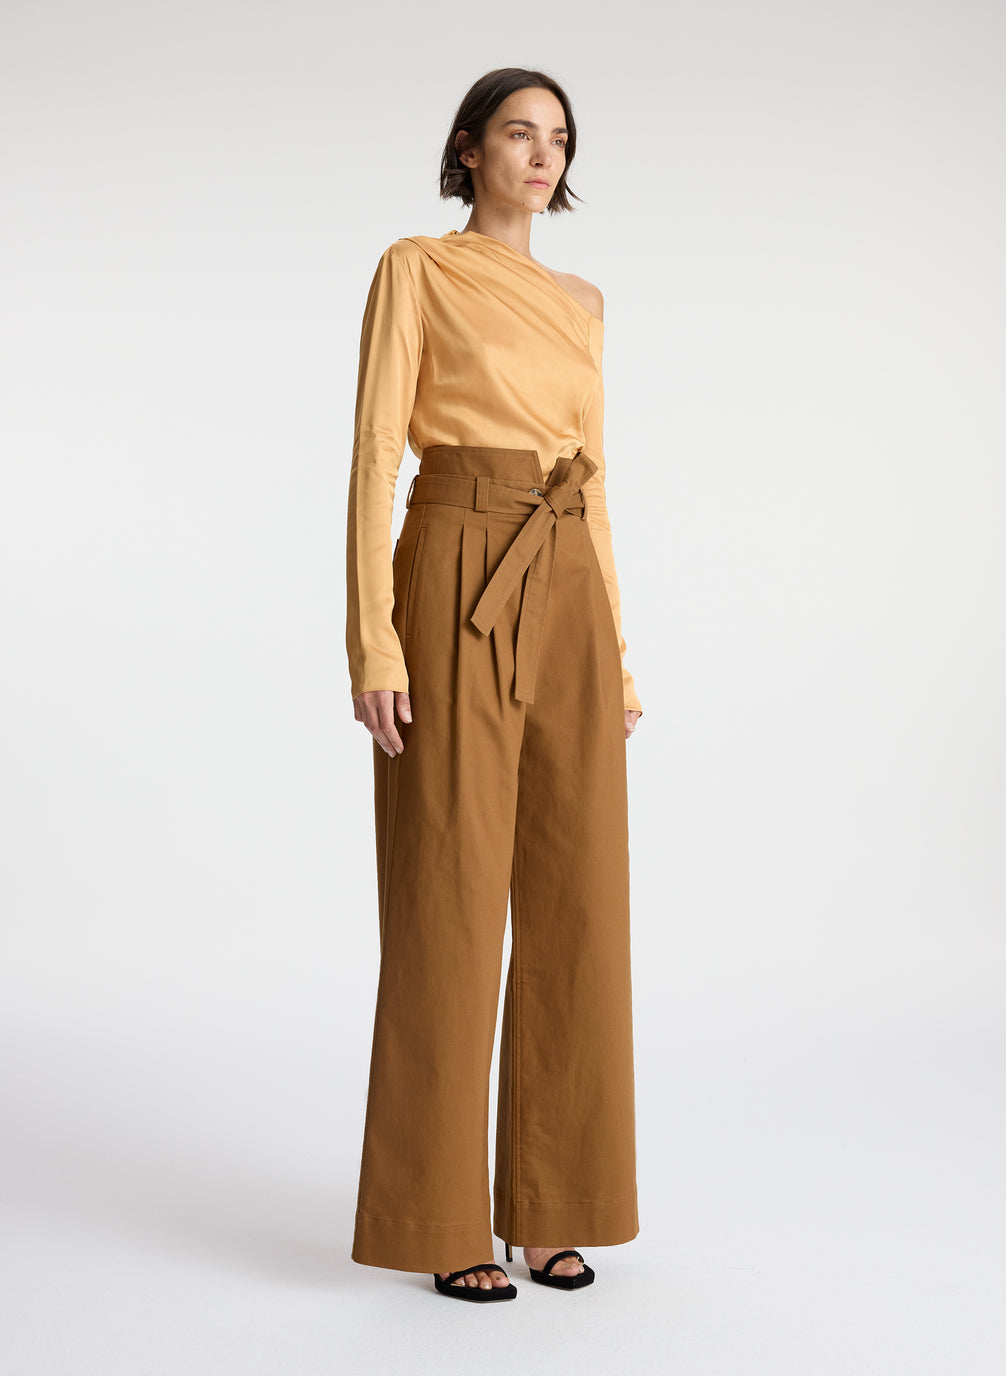 side view of woman wearing tan one shoulder long sleeve top and brown wide leg pants